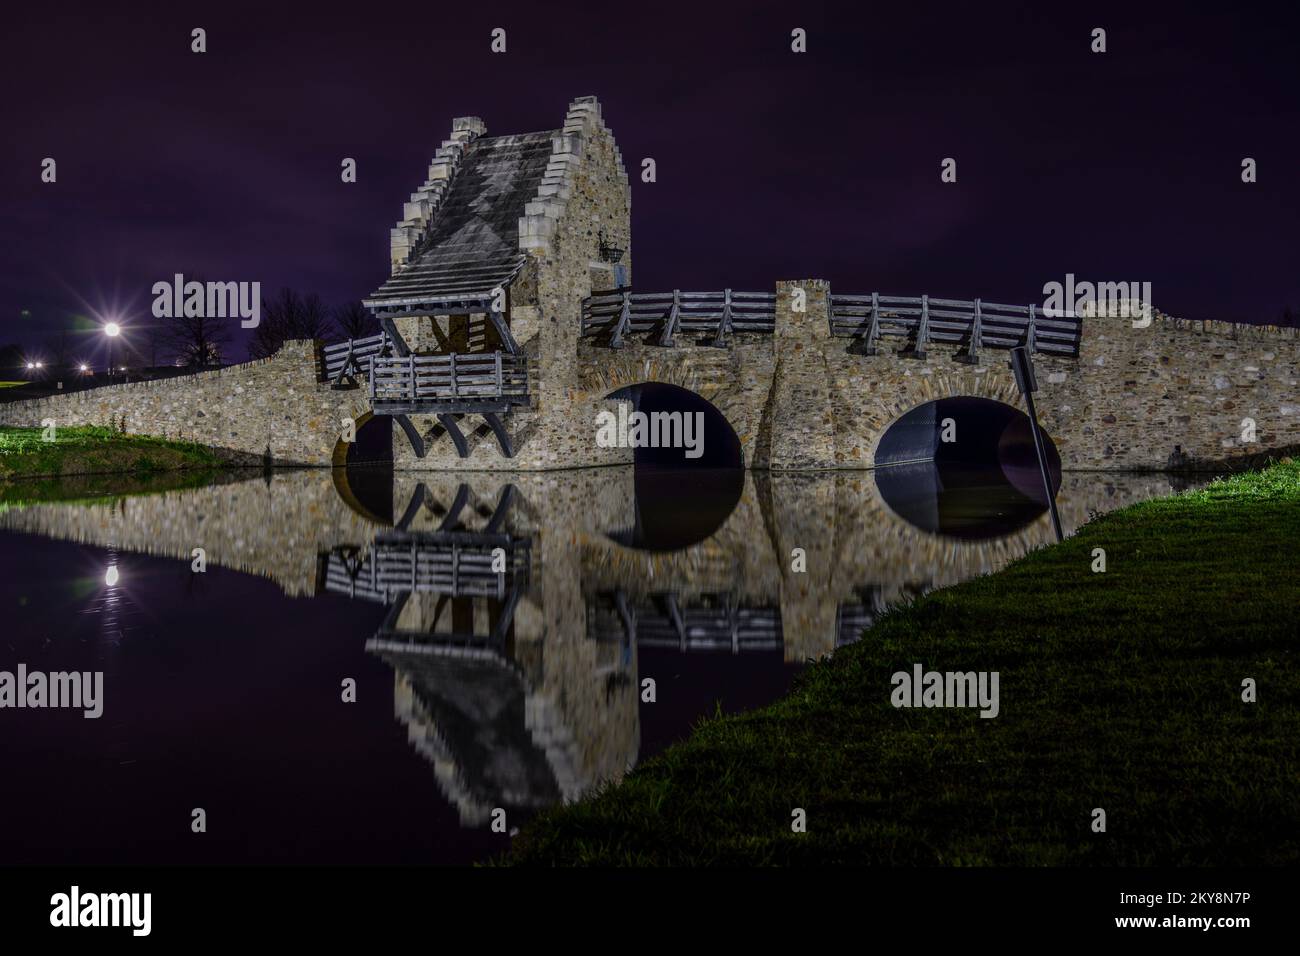 Stone bridge in Blount Cultural Park, at night with a reflection, in Montgomery, Alabama, USA. Stock Photo